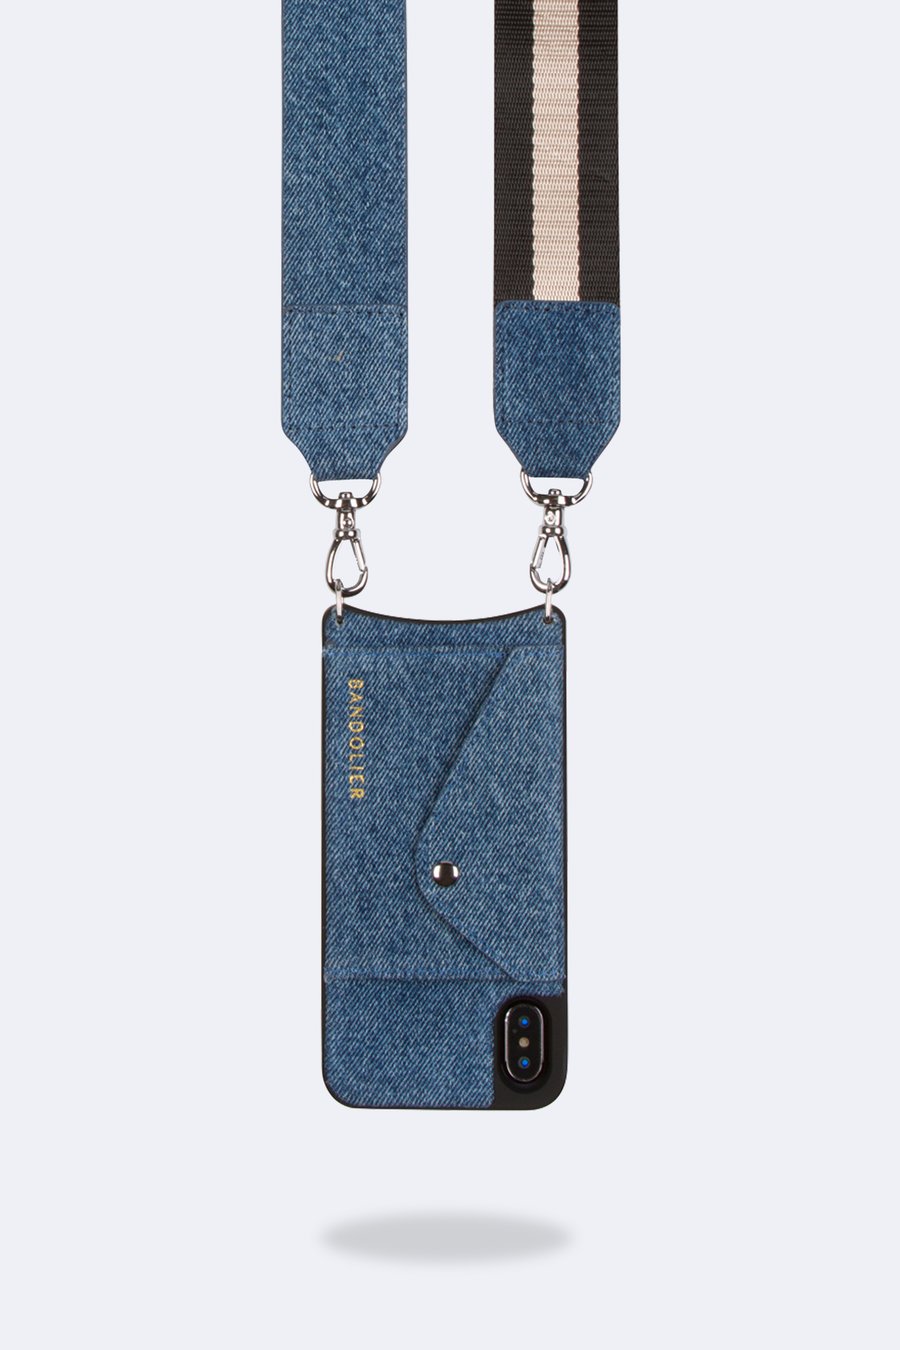 The new Bandolier phone crossbodies. Because women don't get pockets.